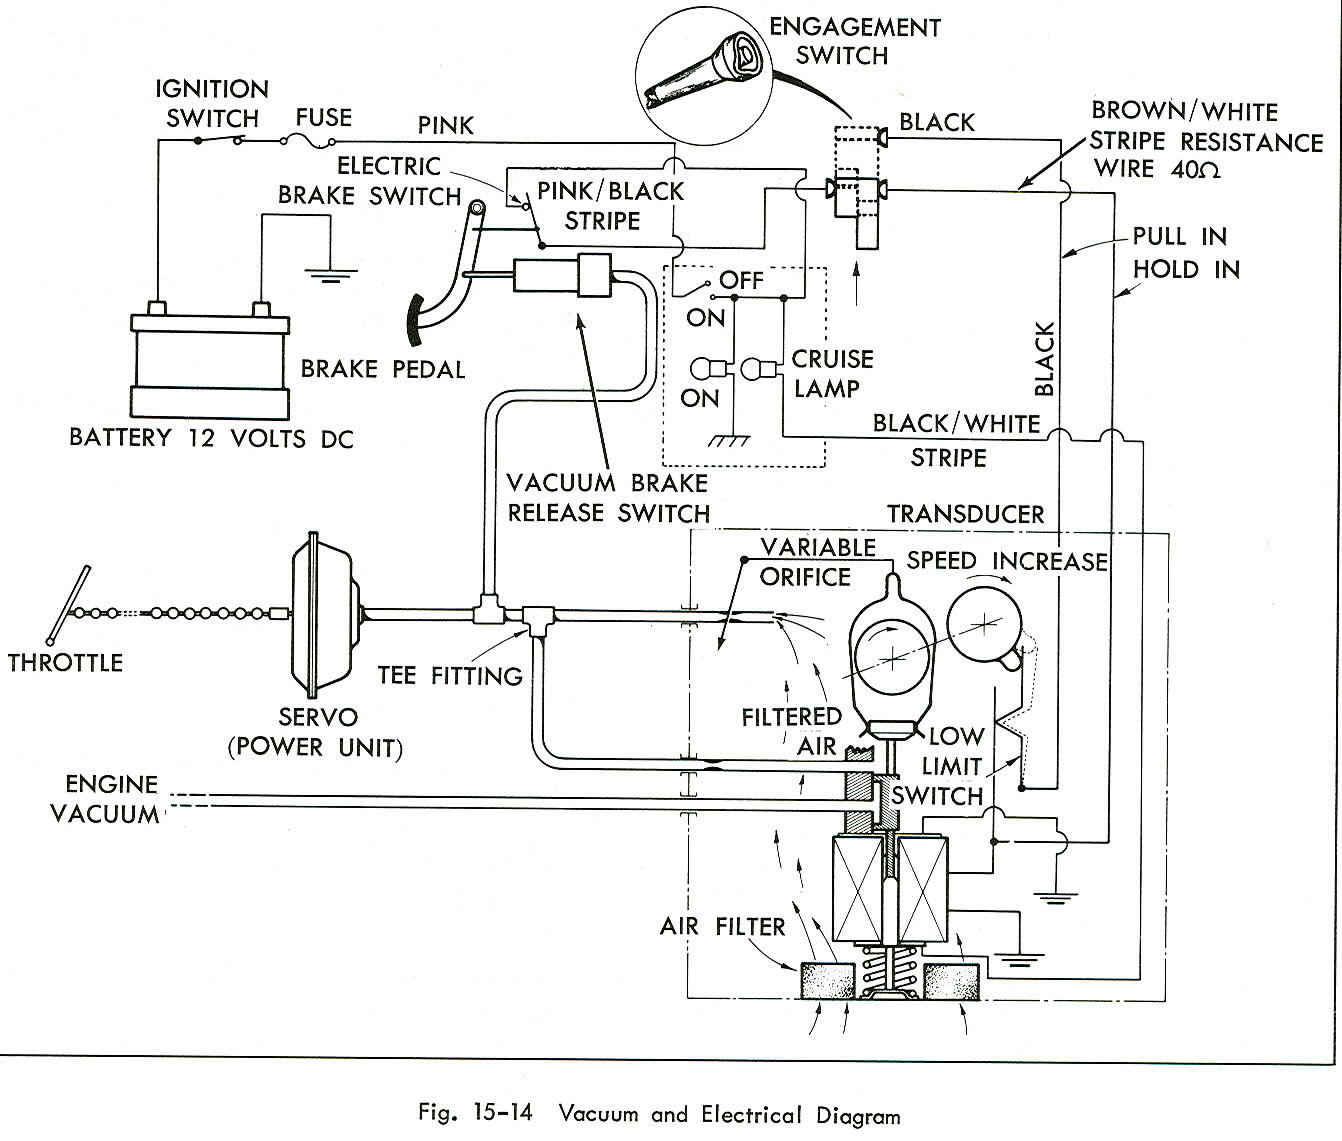 1969 Cadillac Deville Convertible Wiring Diagram from www.cadillacville.com